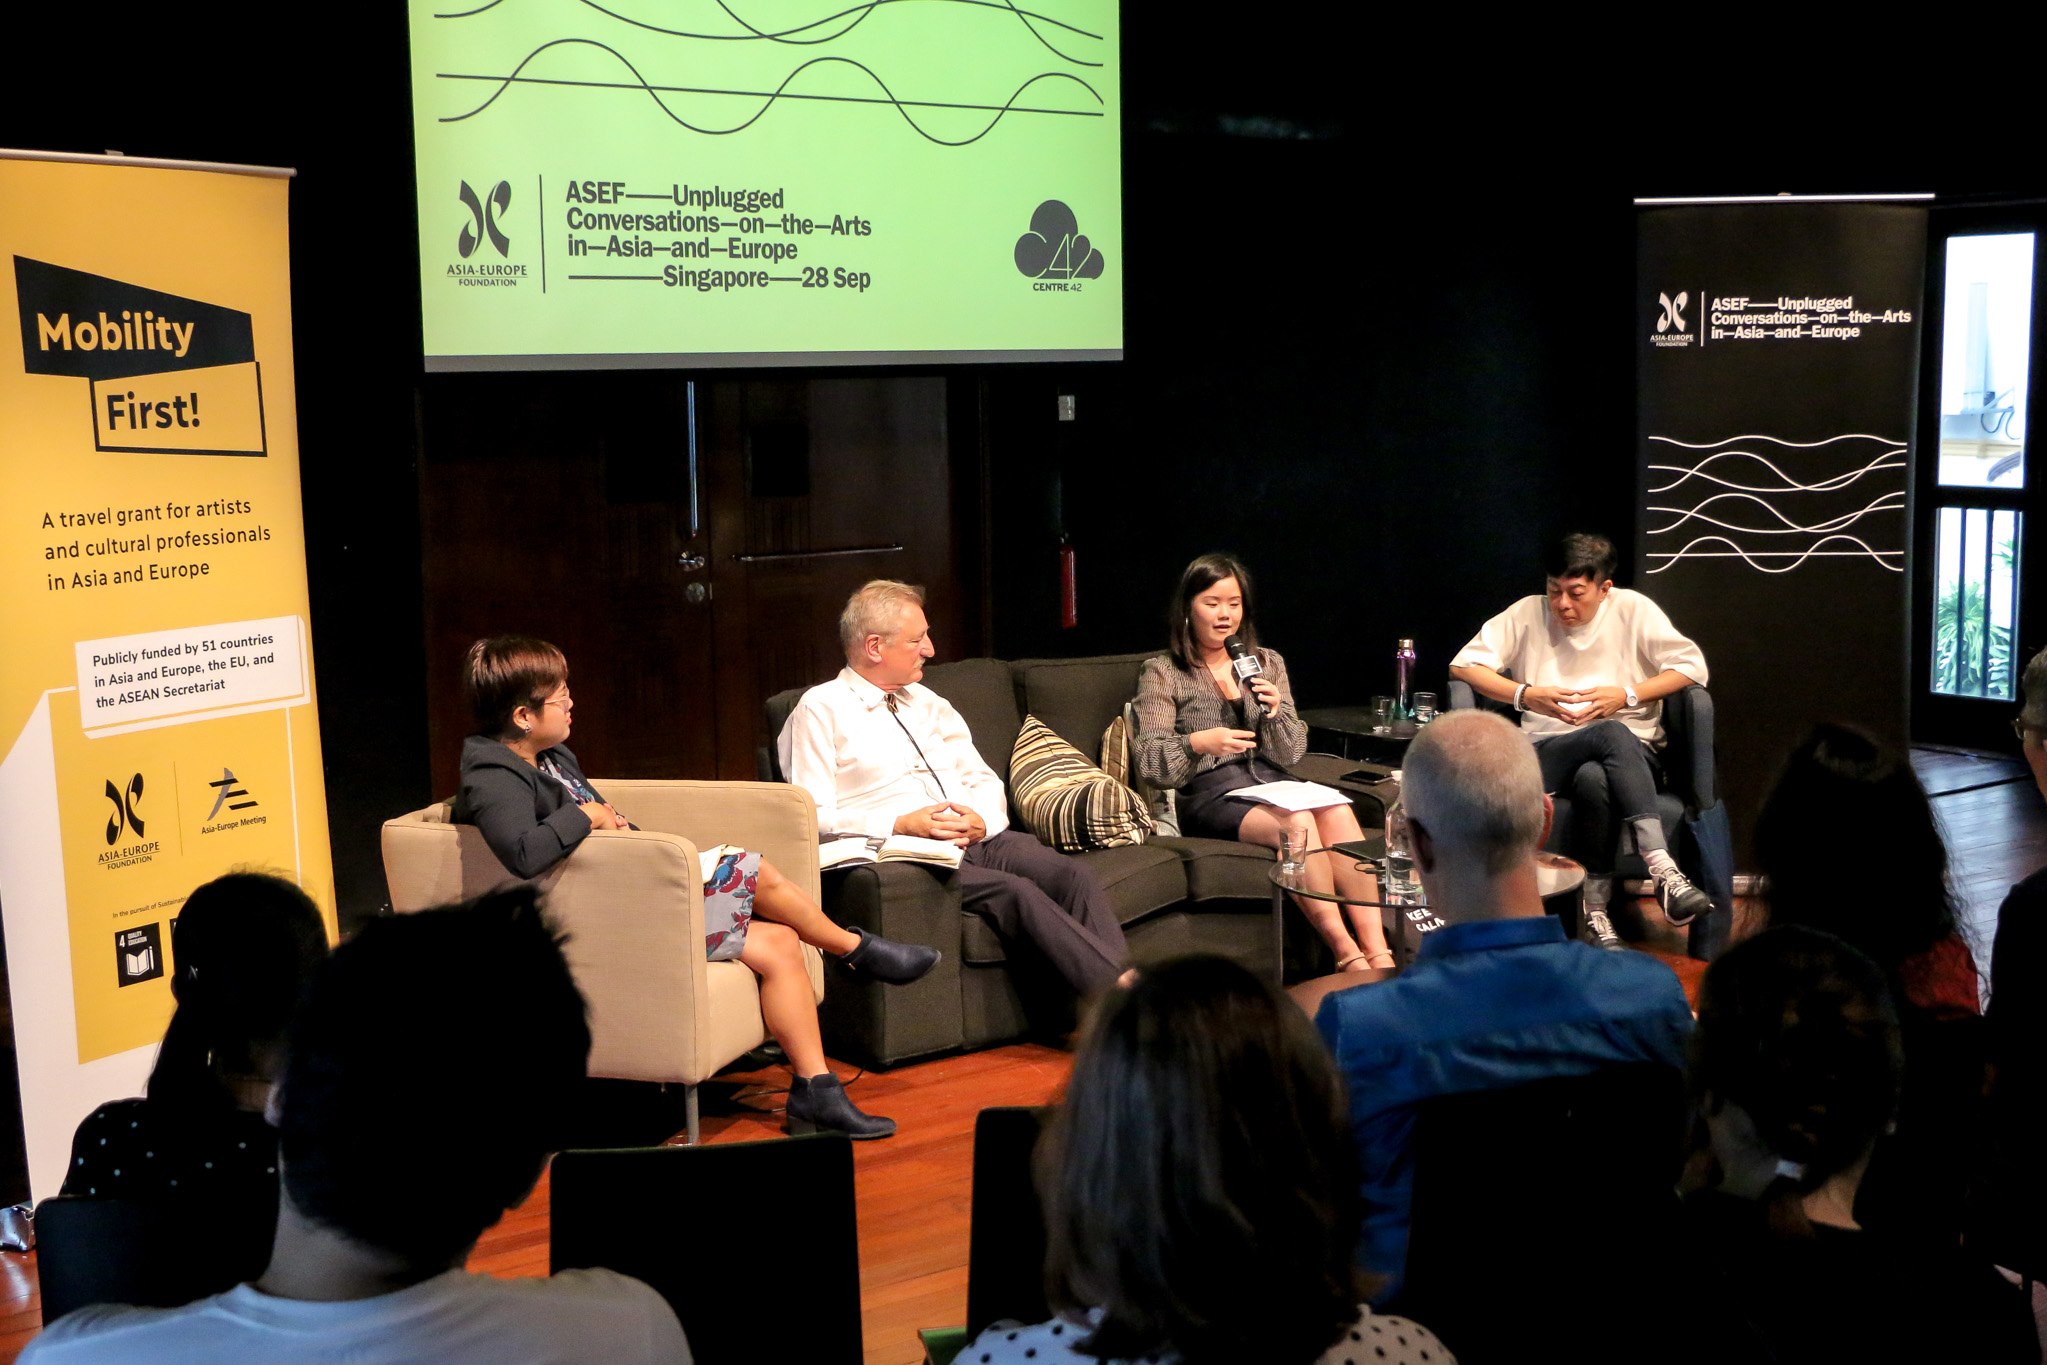 Photograph of ASEF Unplugged, with 4 speakers seated on couches at the Centre 42 Black Box. A projector screen is seen behind them.